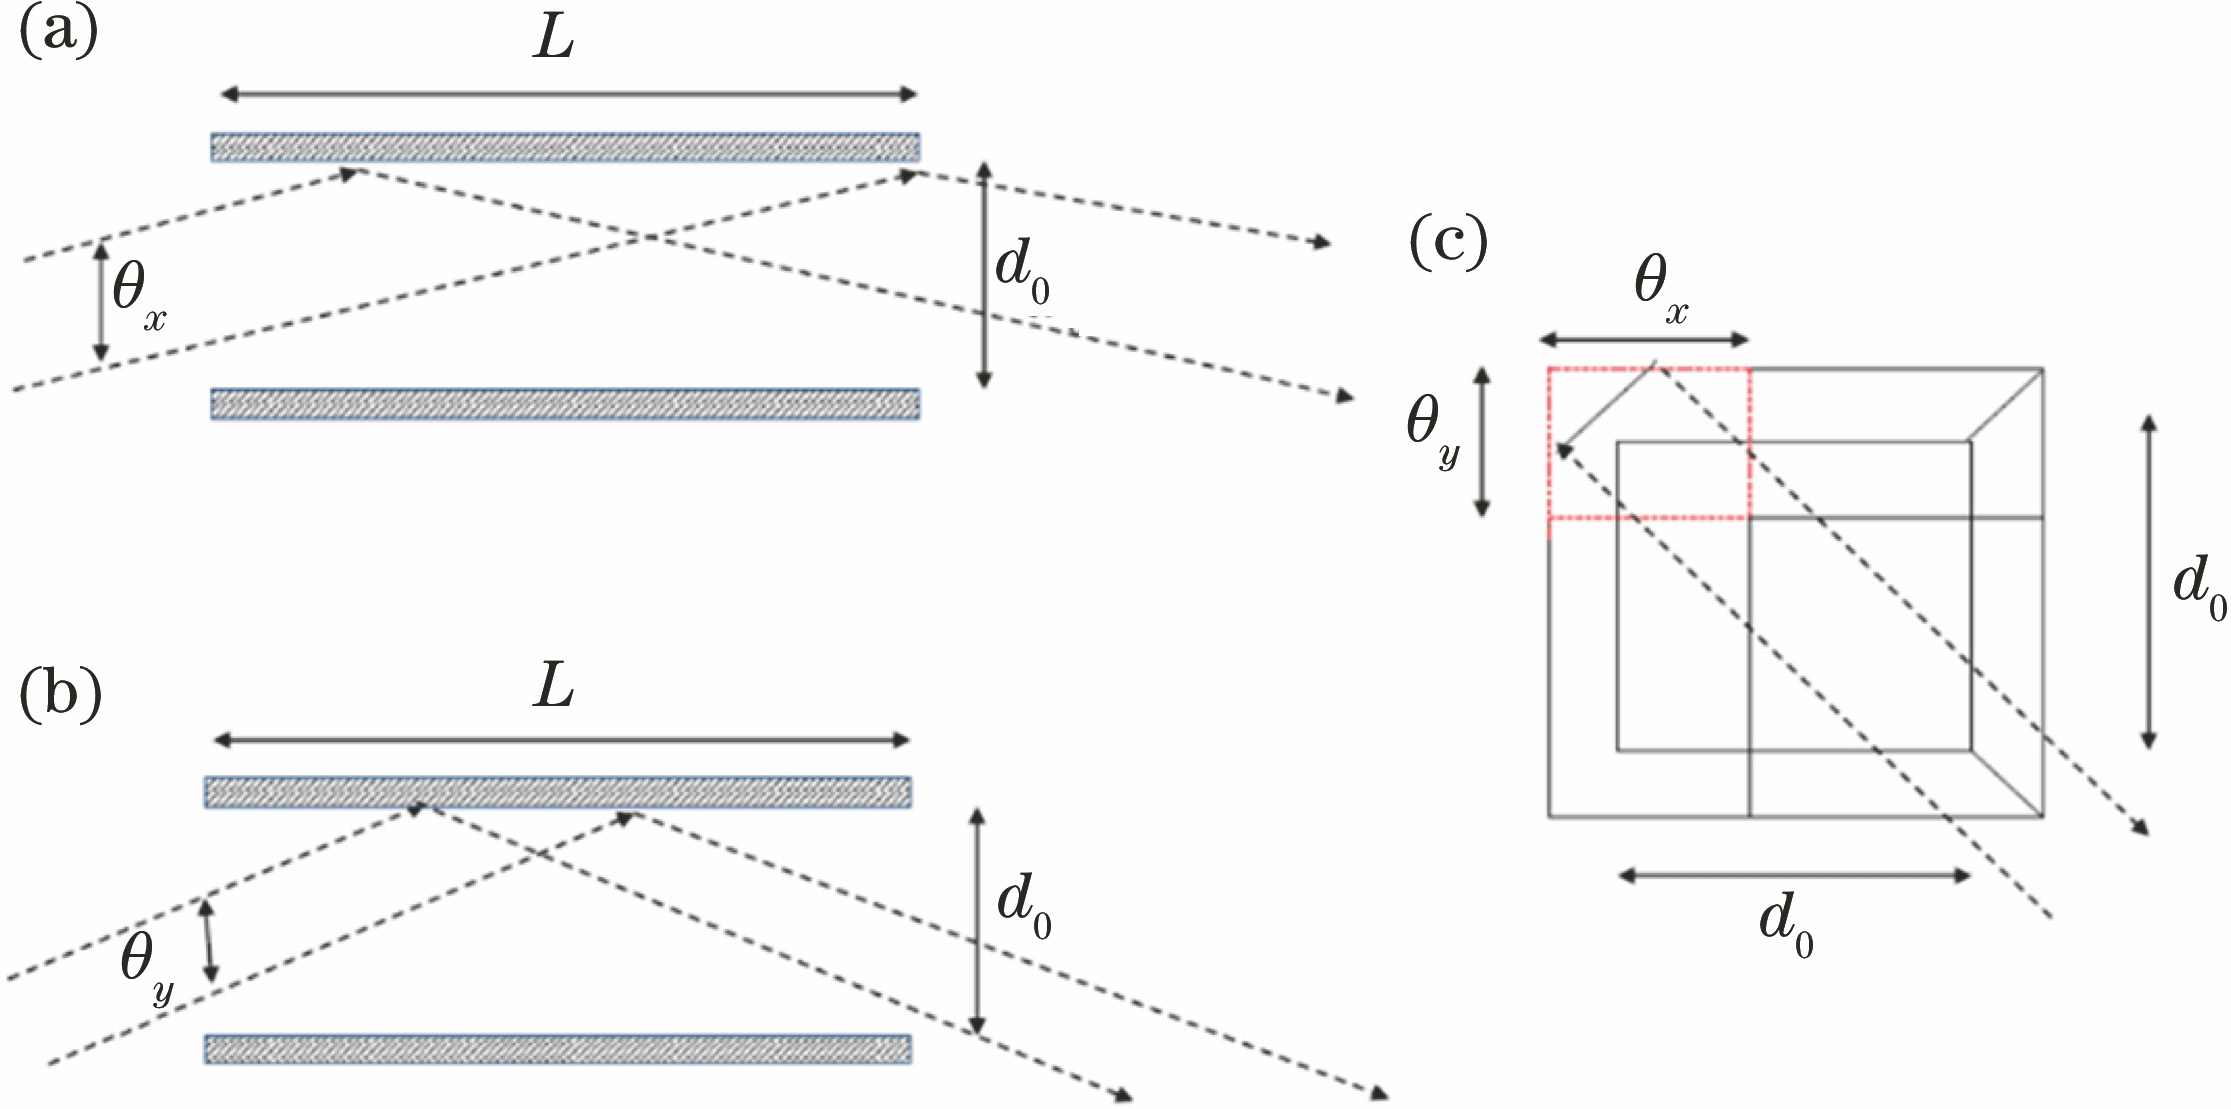 Reflection area diagrams of single square ray. (a) Cross-sectional view in x direction; (b) cross-sectional view in y direction; (c) xy cross-sectional view